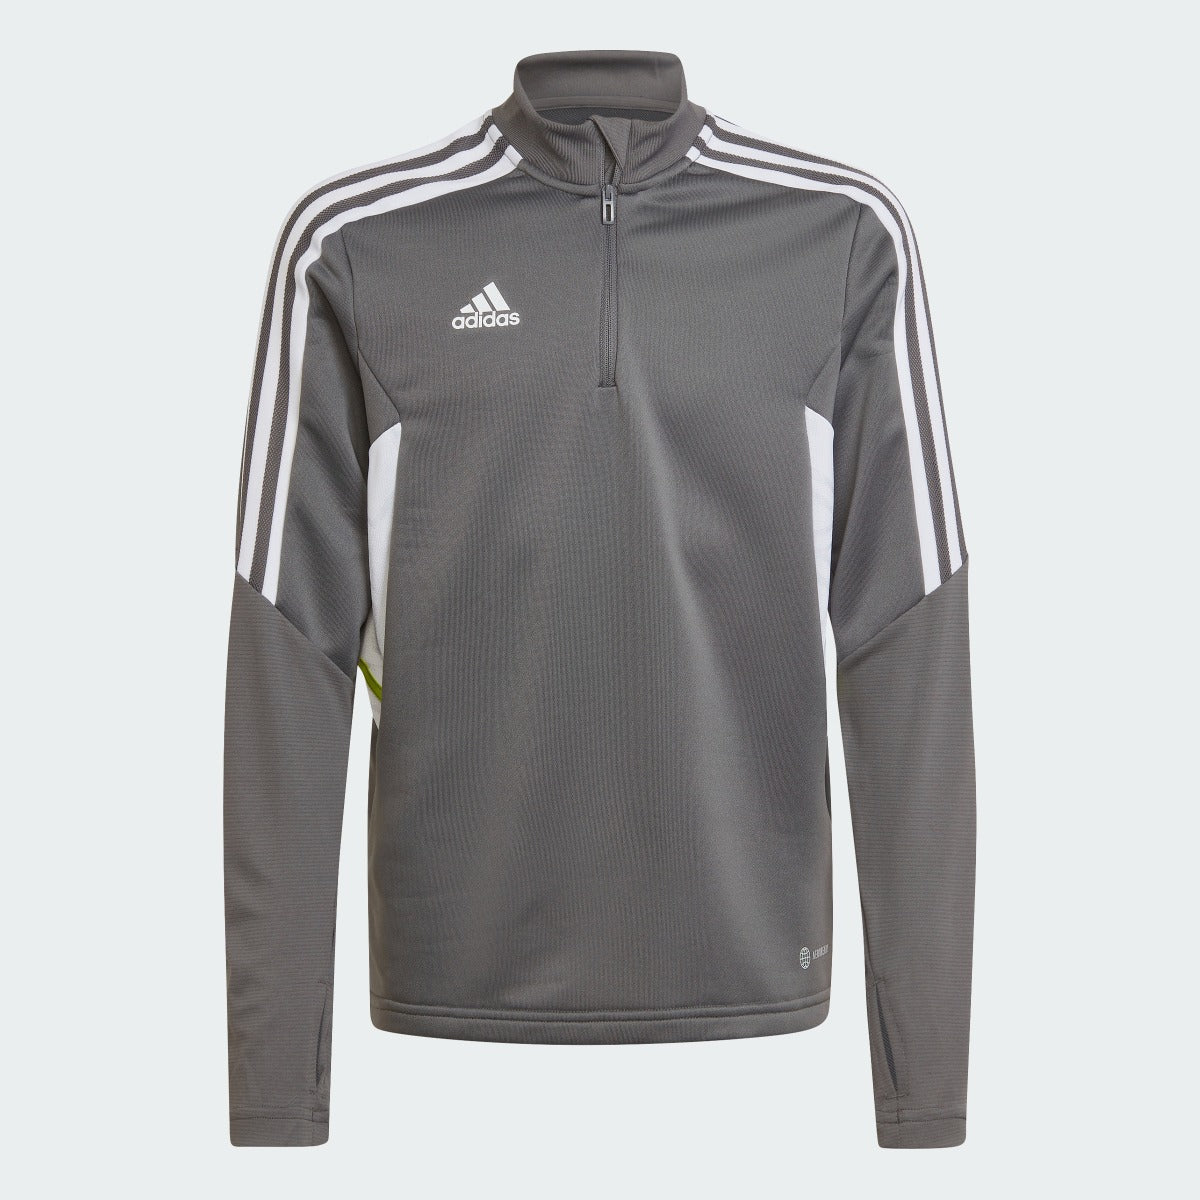 adidas Condivo 22 Youth Training Top Team Grey (Front)